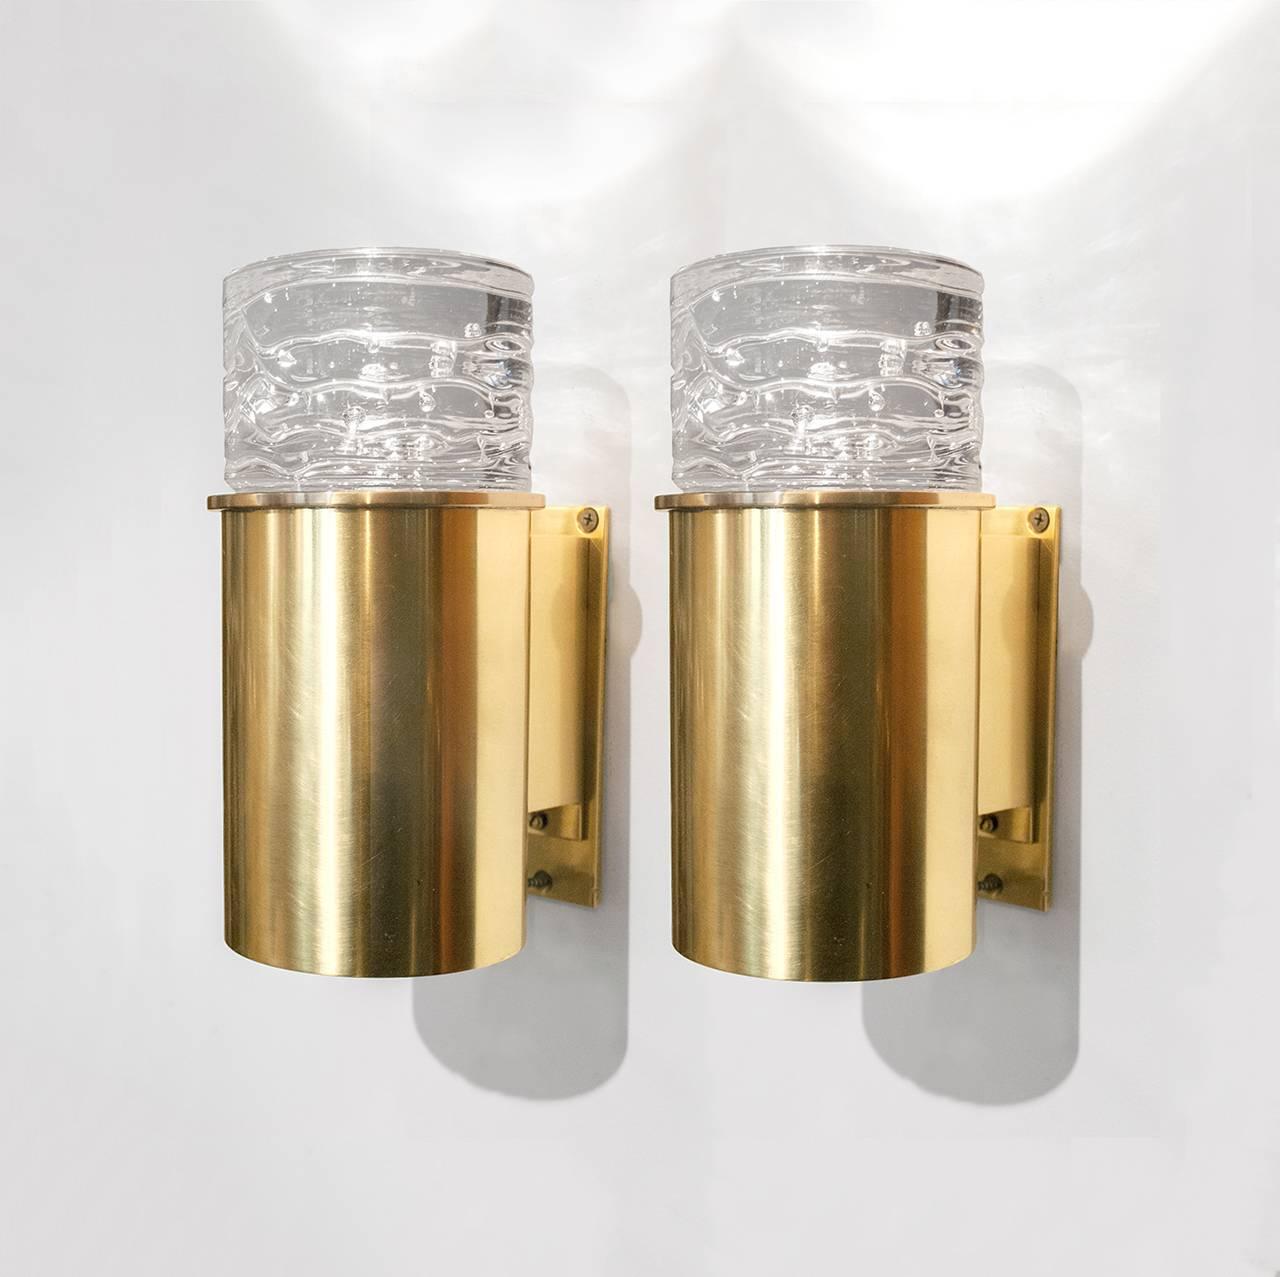 Pair of Scandinavian Modern midcentury polished brass sconces with a cylindrical form topped with a heavy crystal glass element. Each sconce is supported by an arm which mounts onto a sliding wall plate. Newly rewired with a single candelabra bulb